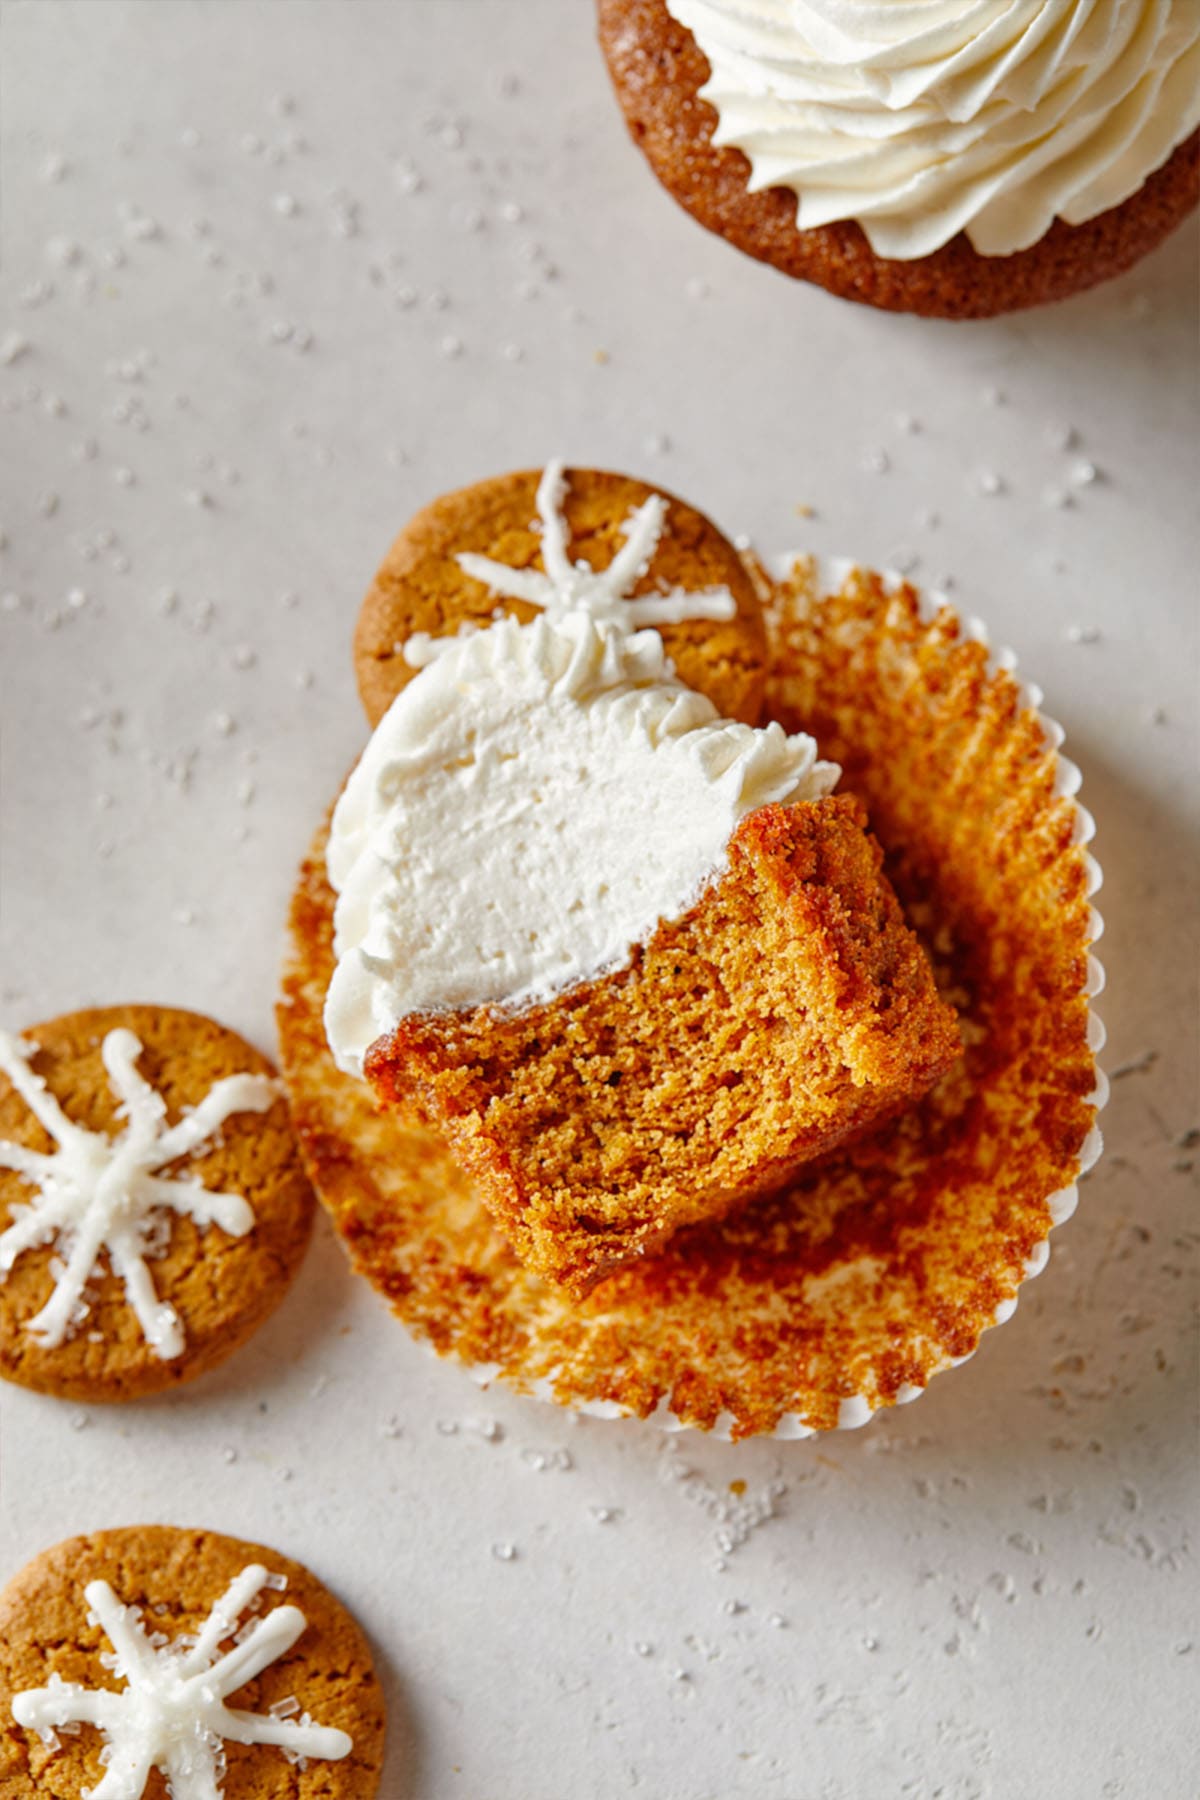 A gingerbread cupcake with a bite missing facing up to show the inside of the cupcake.